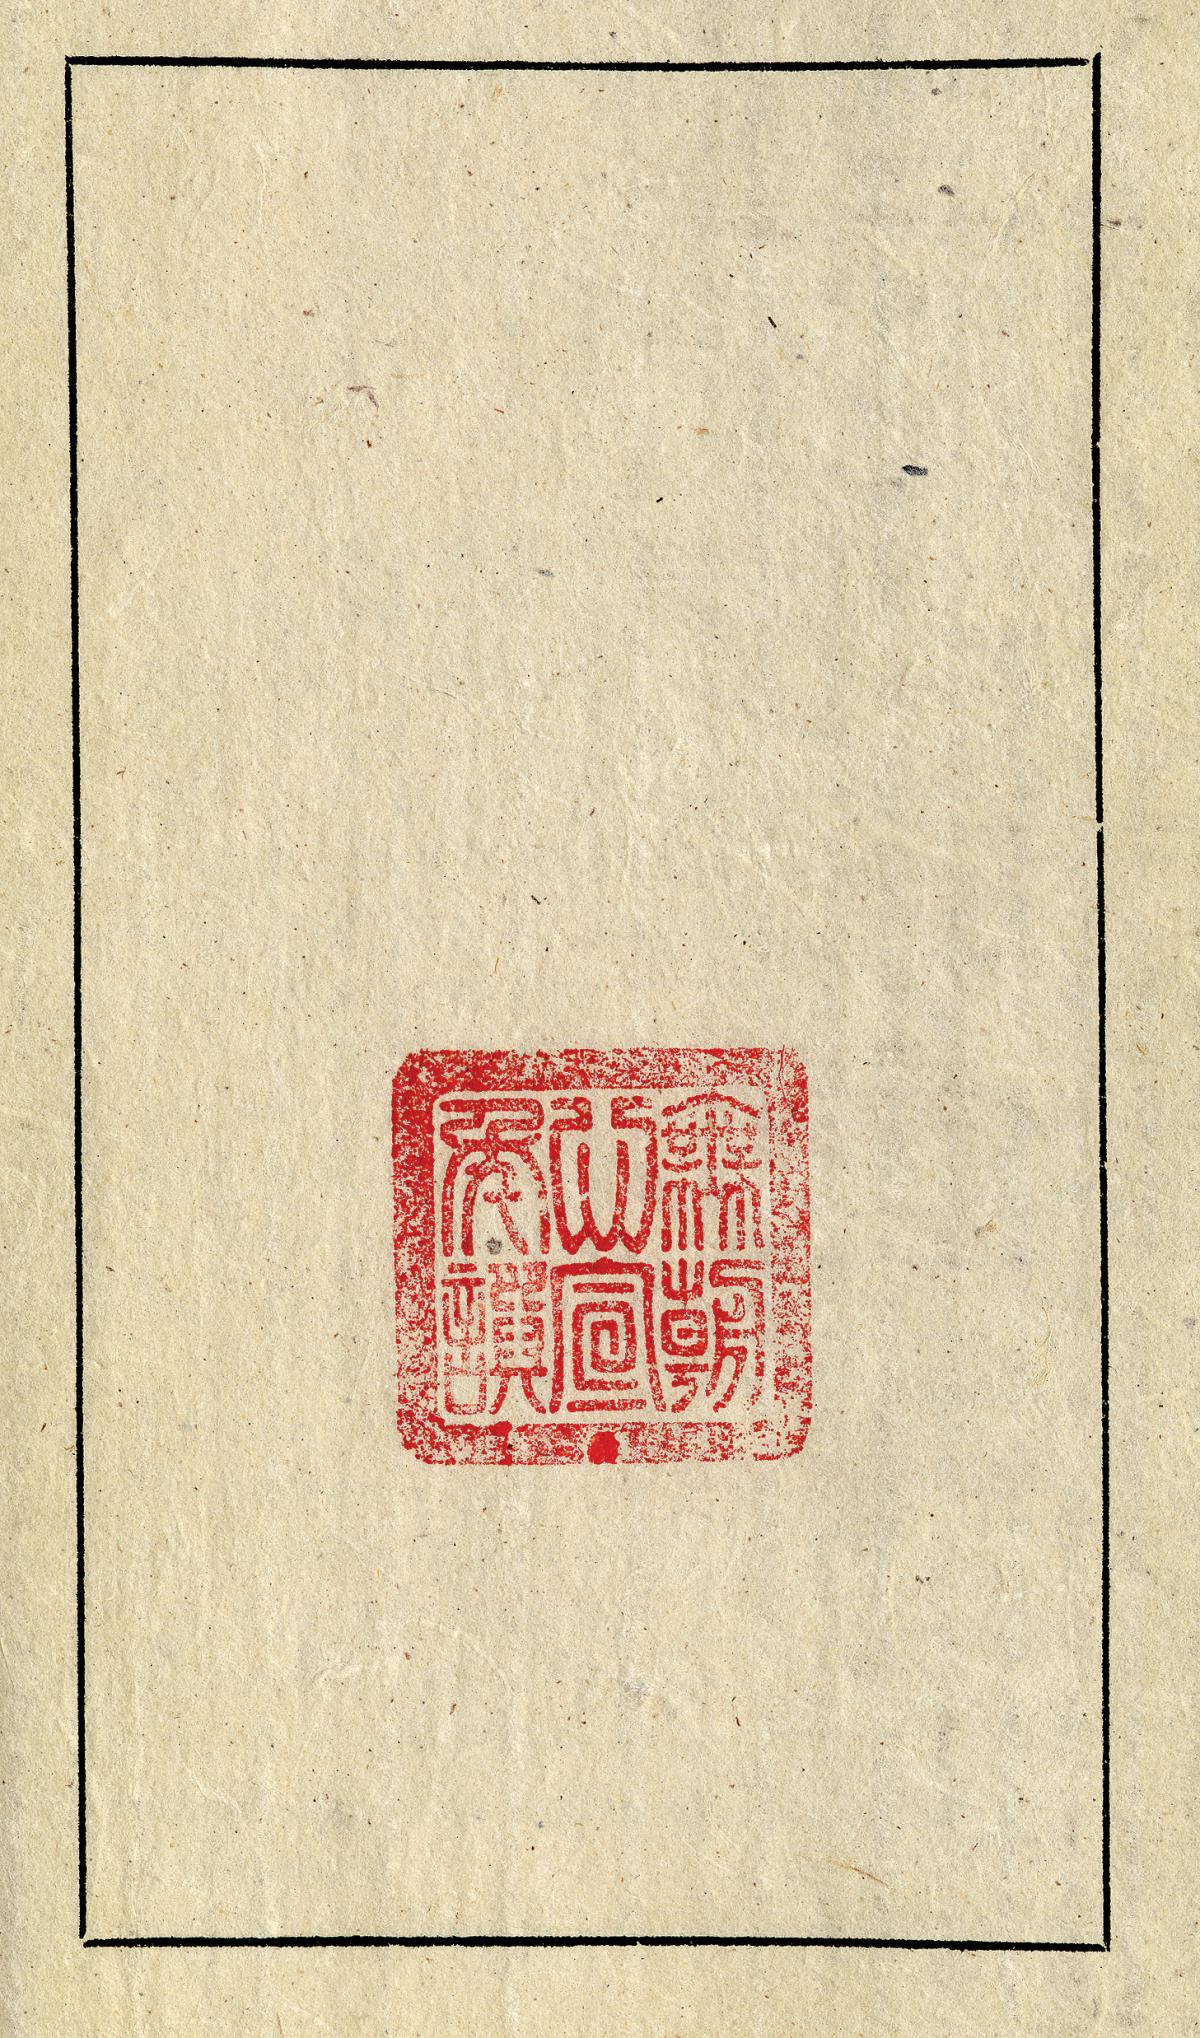 Seal printed in red ink on yellowing paper